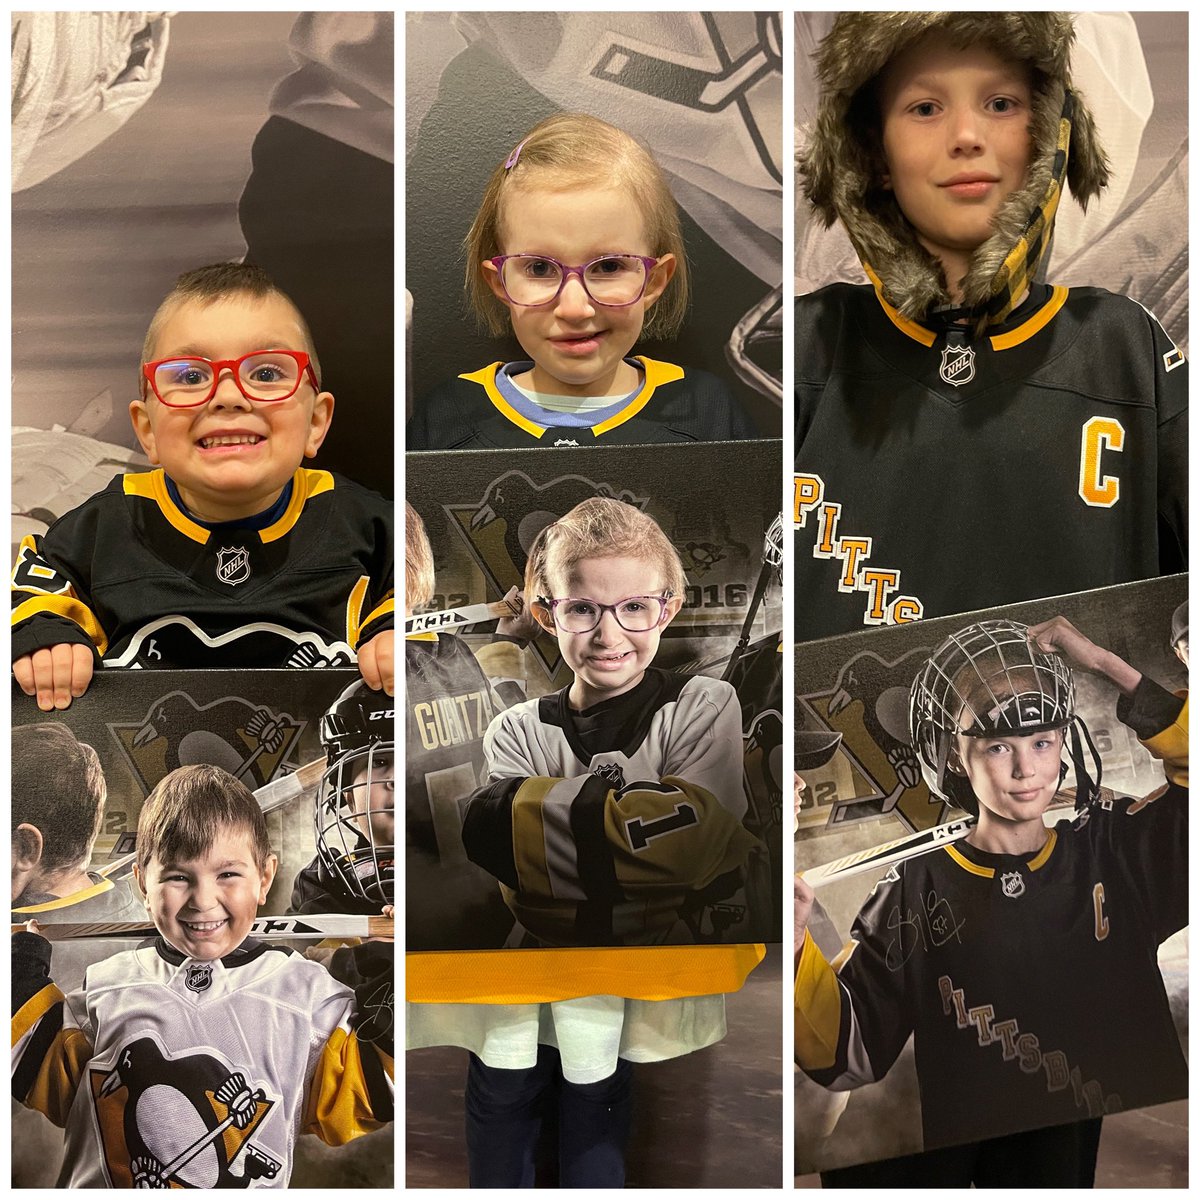 Hey @BizNasty2point0 @ryanwhitney6 @spittinchiclets @NHL, know who can we speak with to make this happen with every team next year? 🎗🐧❤️💛🖤💛❤️🐧🎗